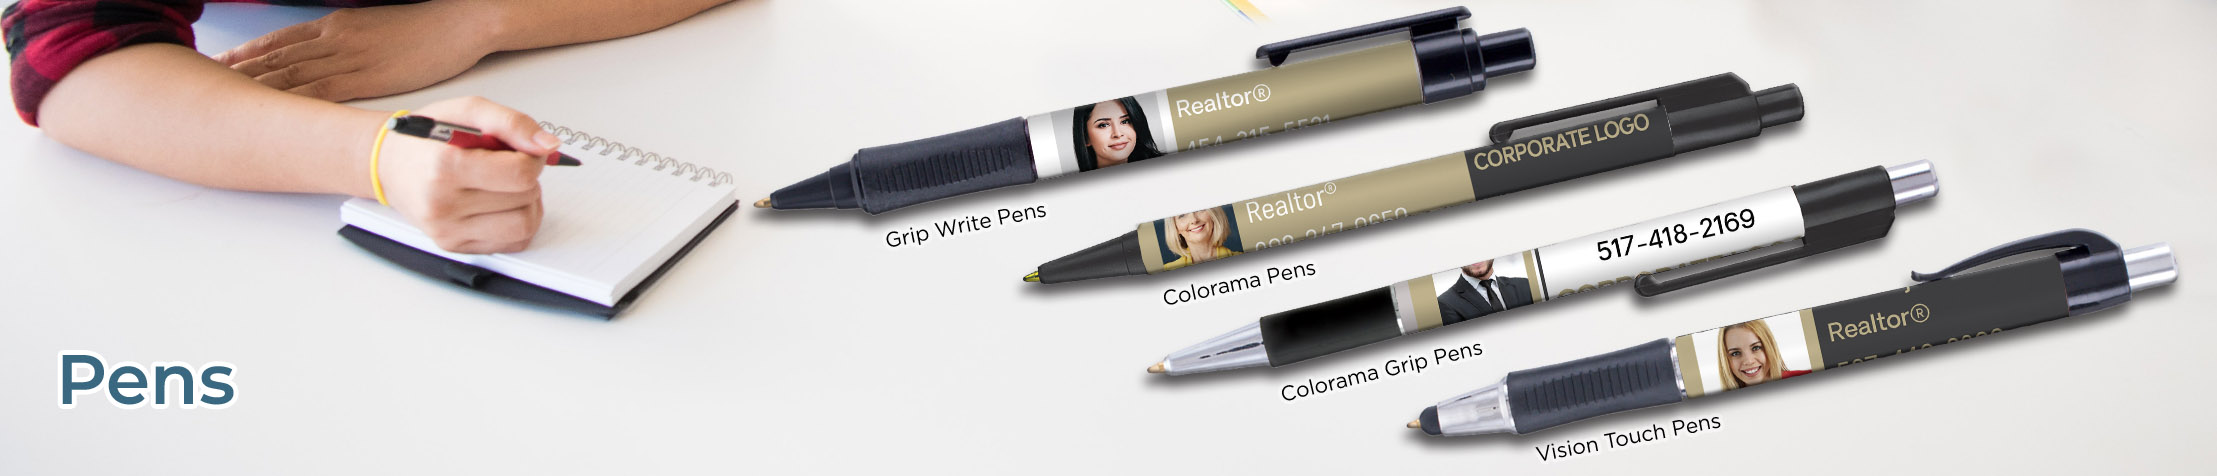 Century 21 Real Estate Personalized Pens - promotional products: Grip Write Pens, Colorama Pens, Vision Touch Pens, and Colorama Grip Pens | BestPrintBuy.com